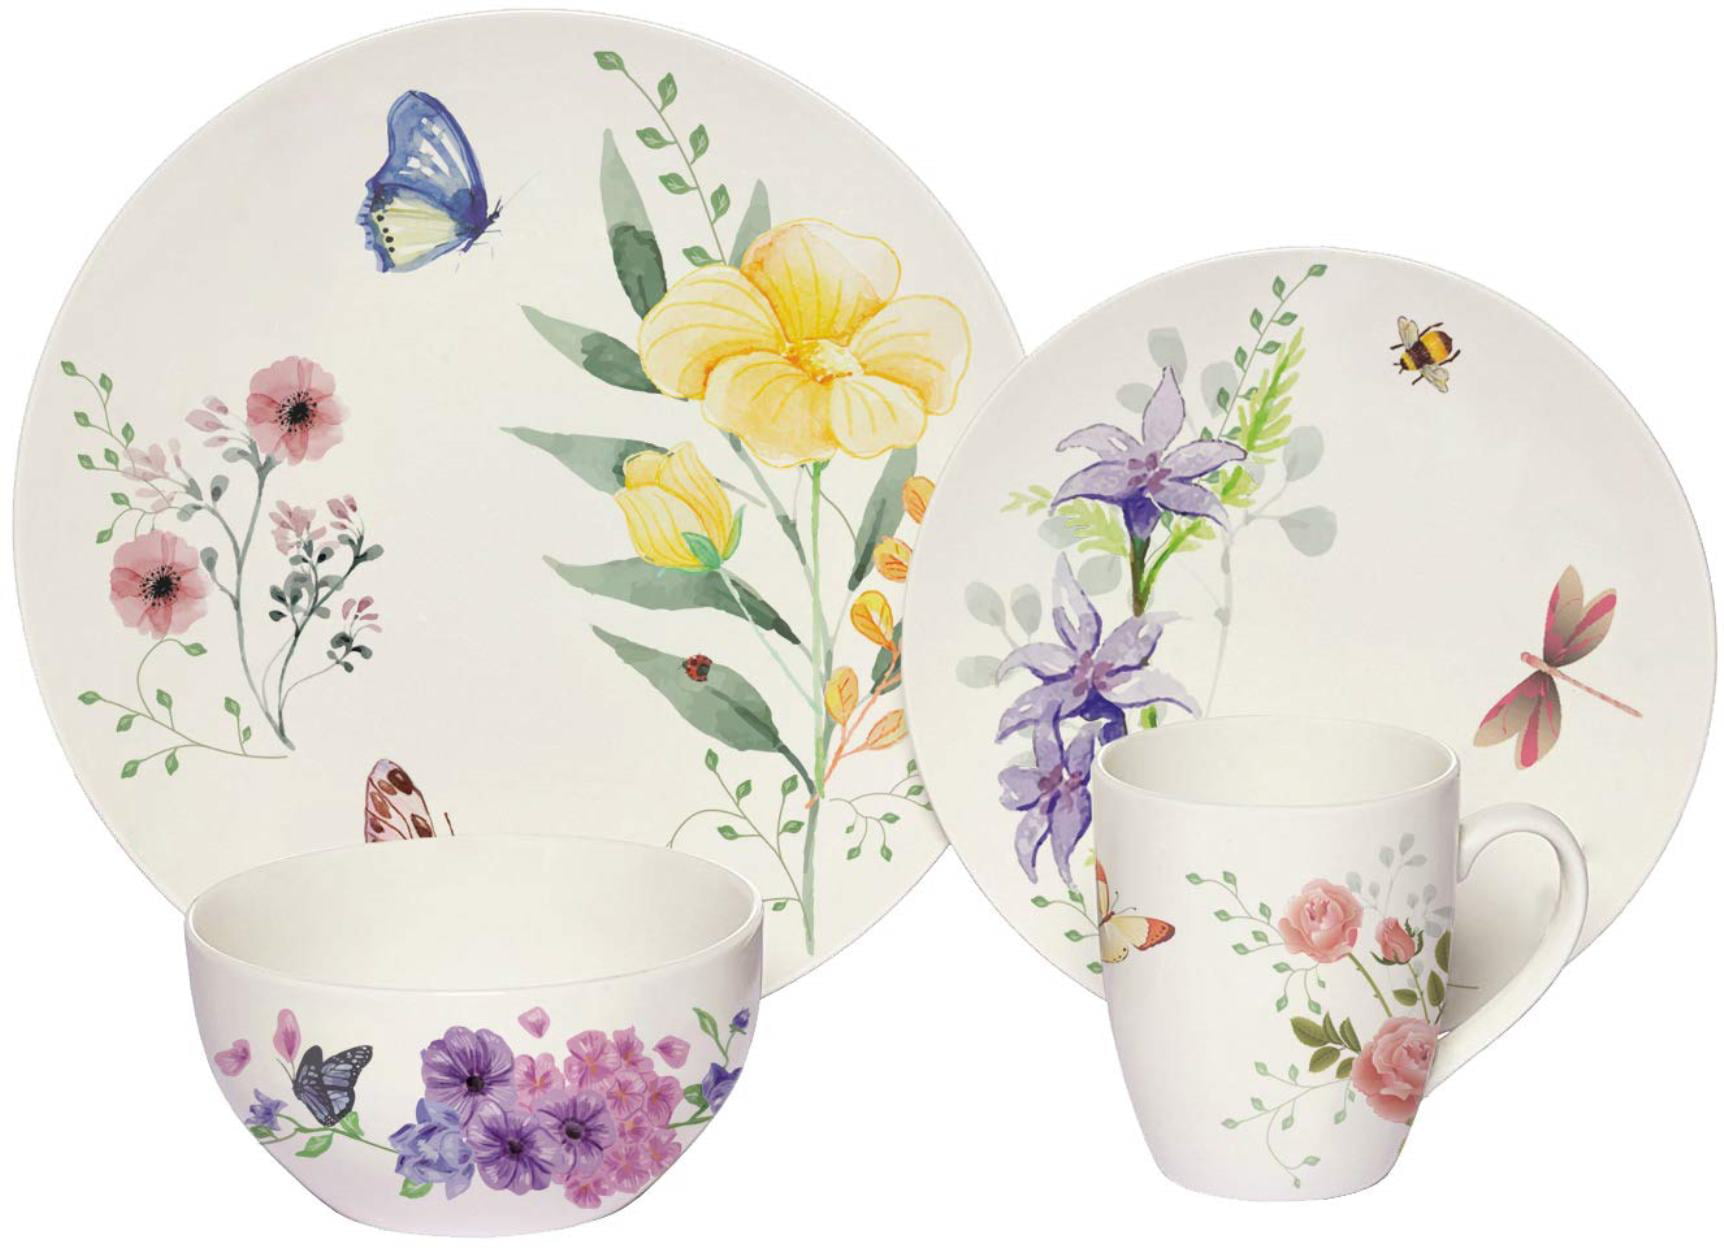 4 Butterfly Insect & Flower 8" Plates Wisteria Catalog Salad Lunch 